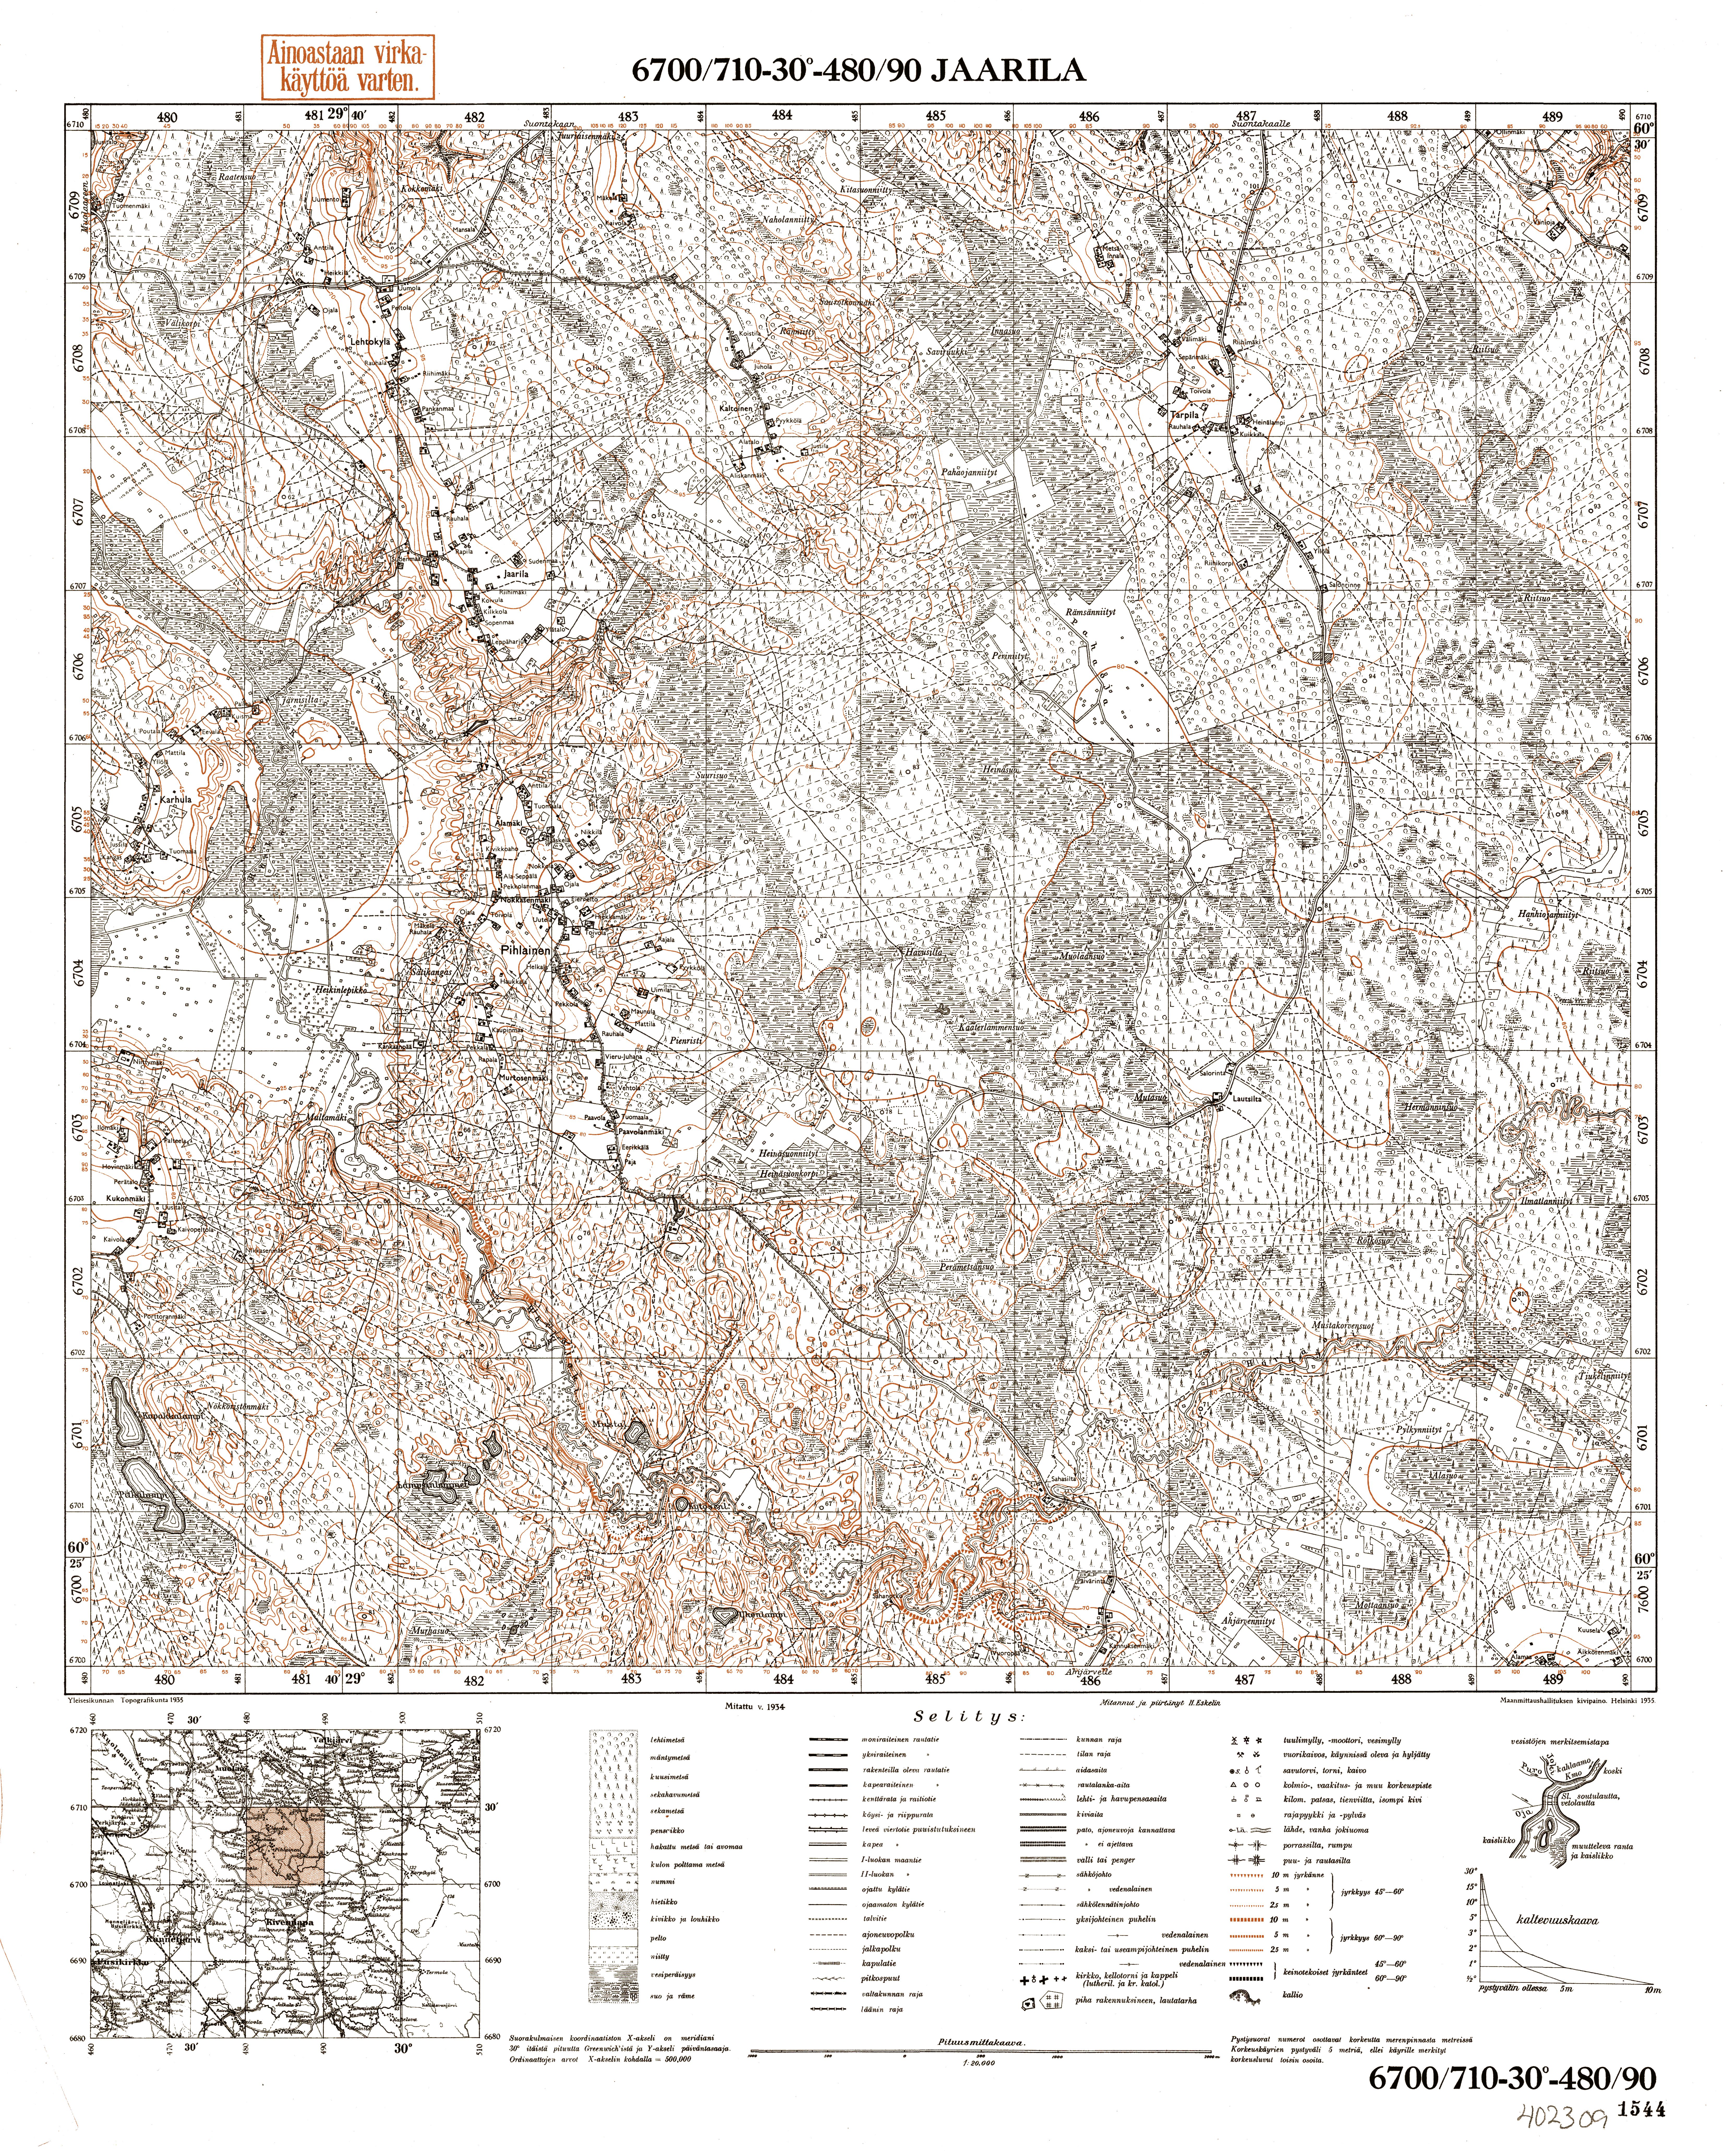 Kljutši Village Site. Jaarila. Topografikartta 402309. Topographic map from 1940. Use the zooming tool to explore in higher level of detail. Obtain as a quality print or high resolution image